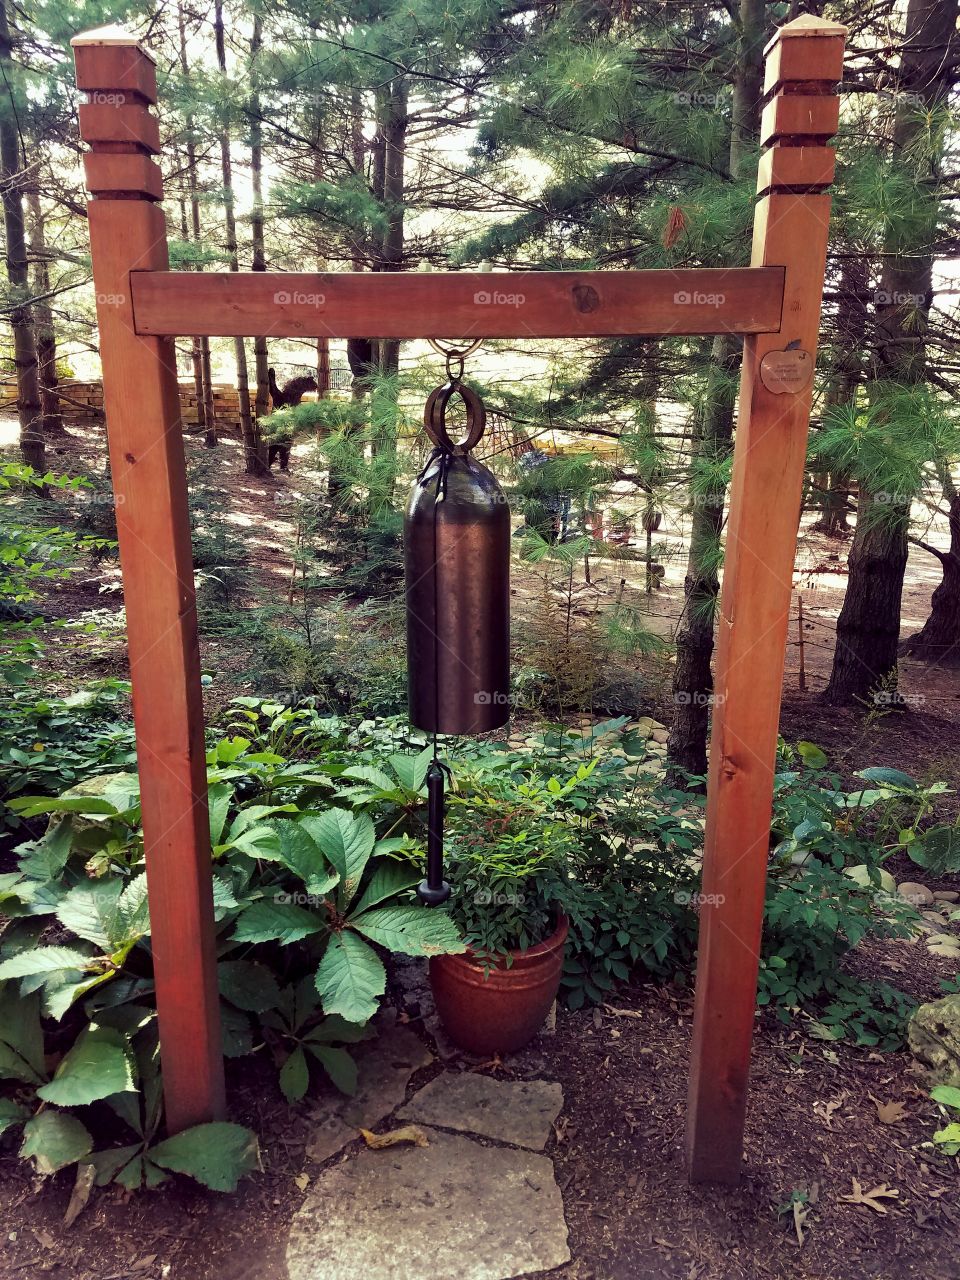 The bell of the garden